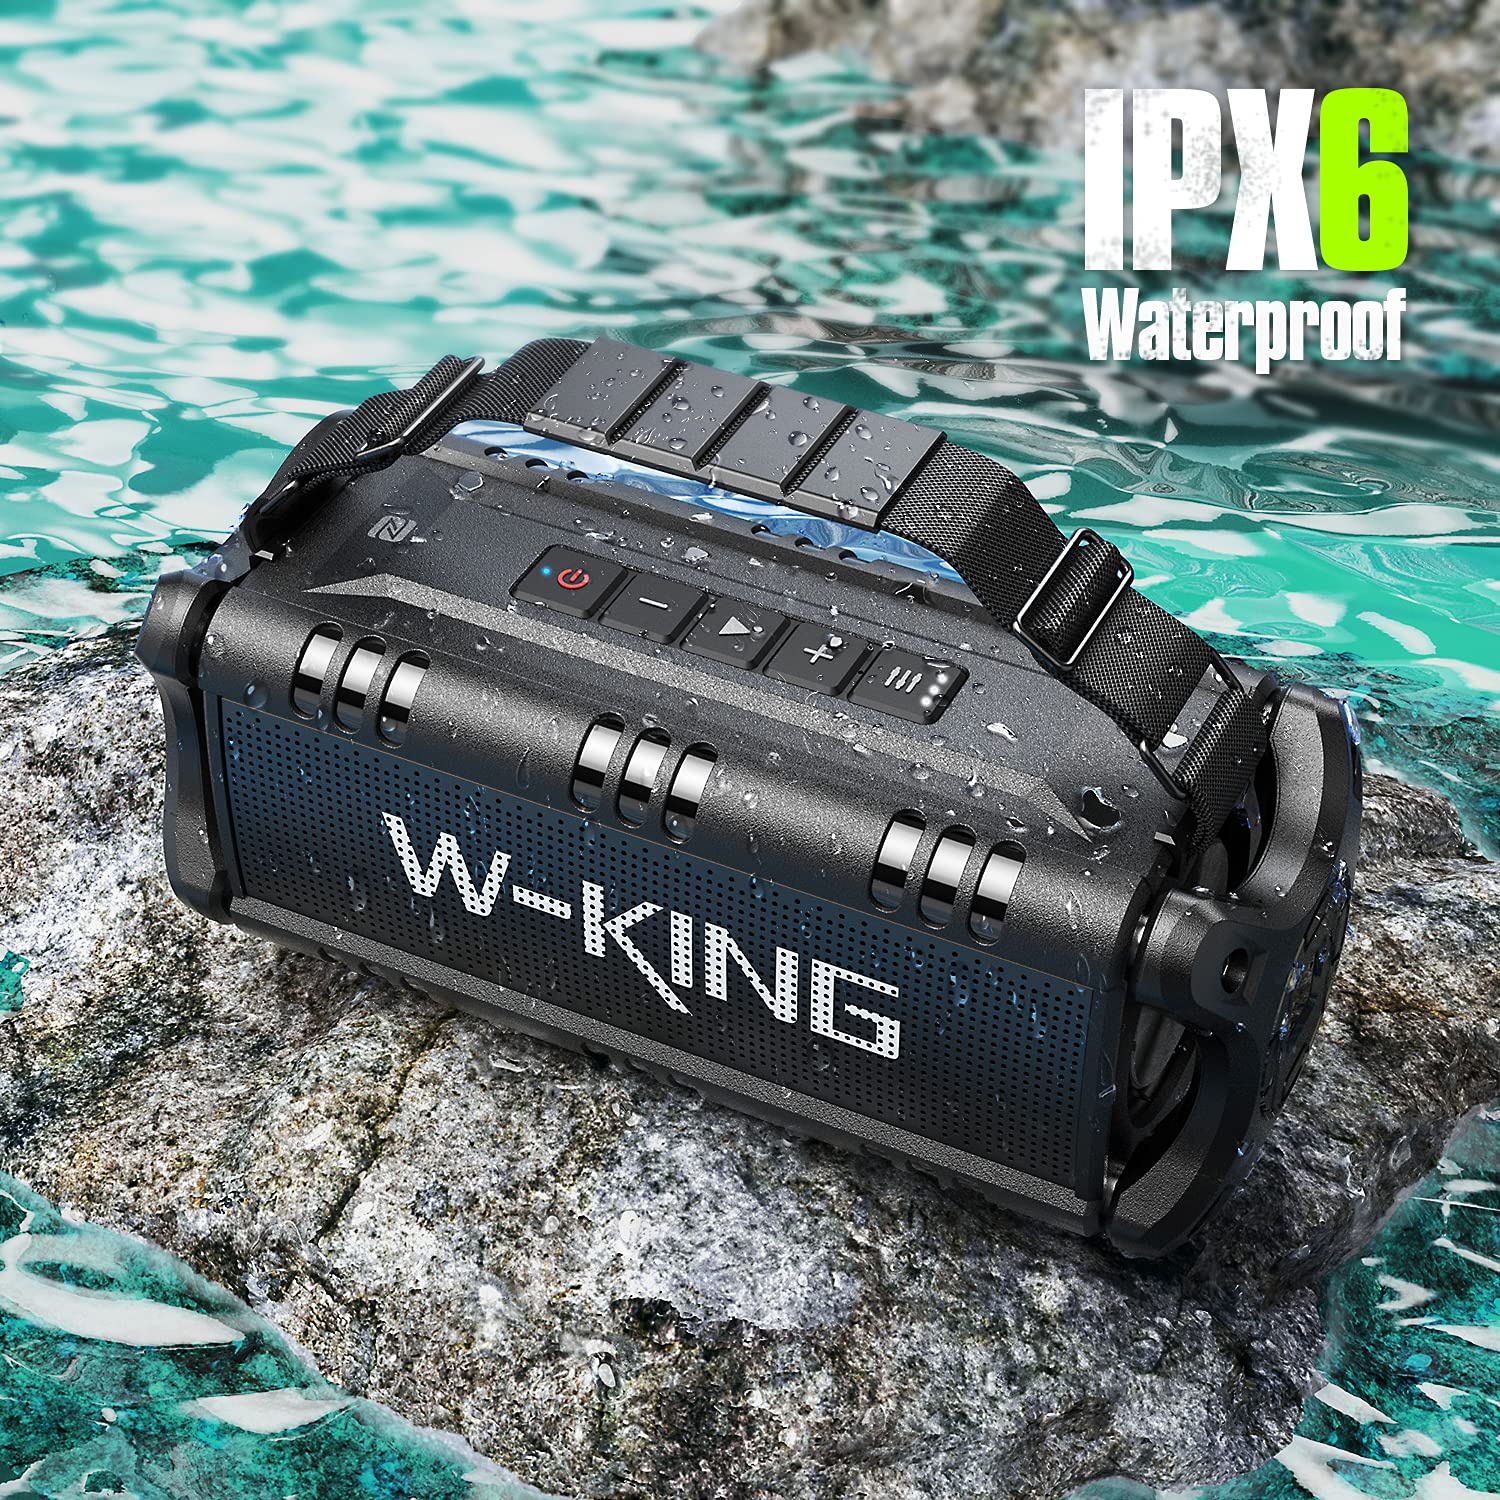 W-KING Bluetooth Speaker, 50W IPX6 Waterproof Loud Wireless, Large Outdoor Portable with Subwoofer for Deep Bass/Bluetooth 5.0/Power Bank/40H Play/TF/AUX/NFC/EQ